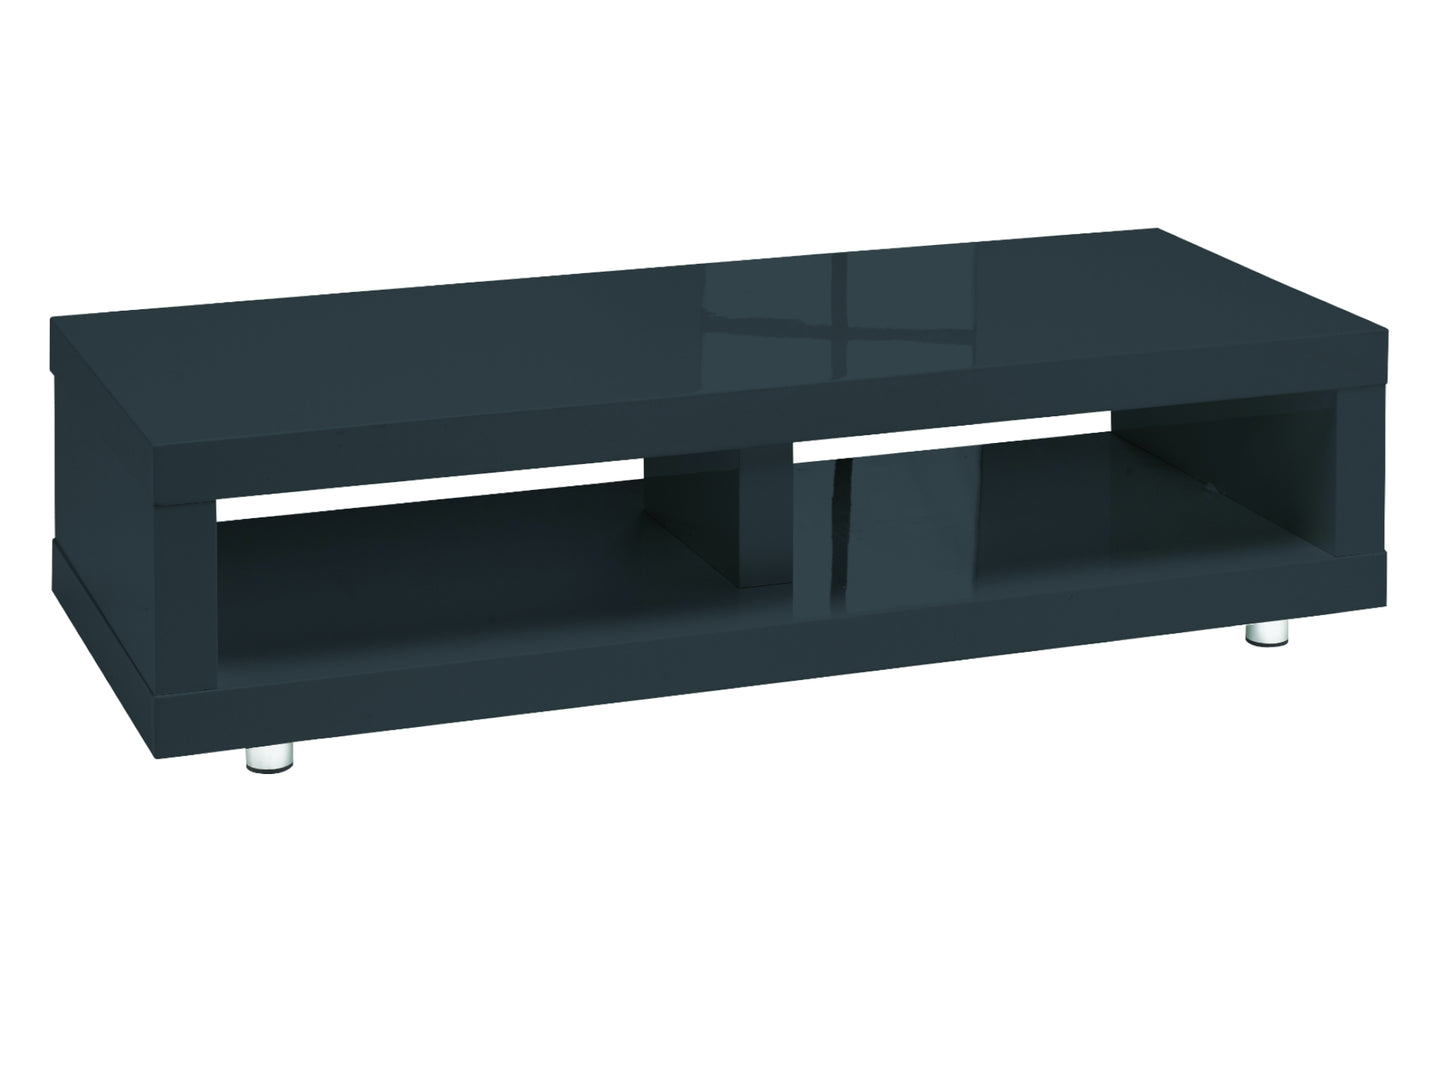 Puro TV Unit in Charcoal